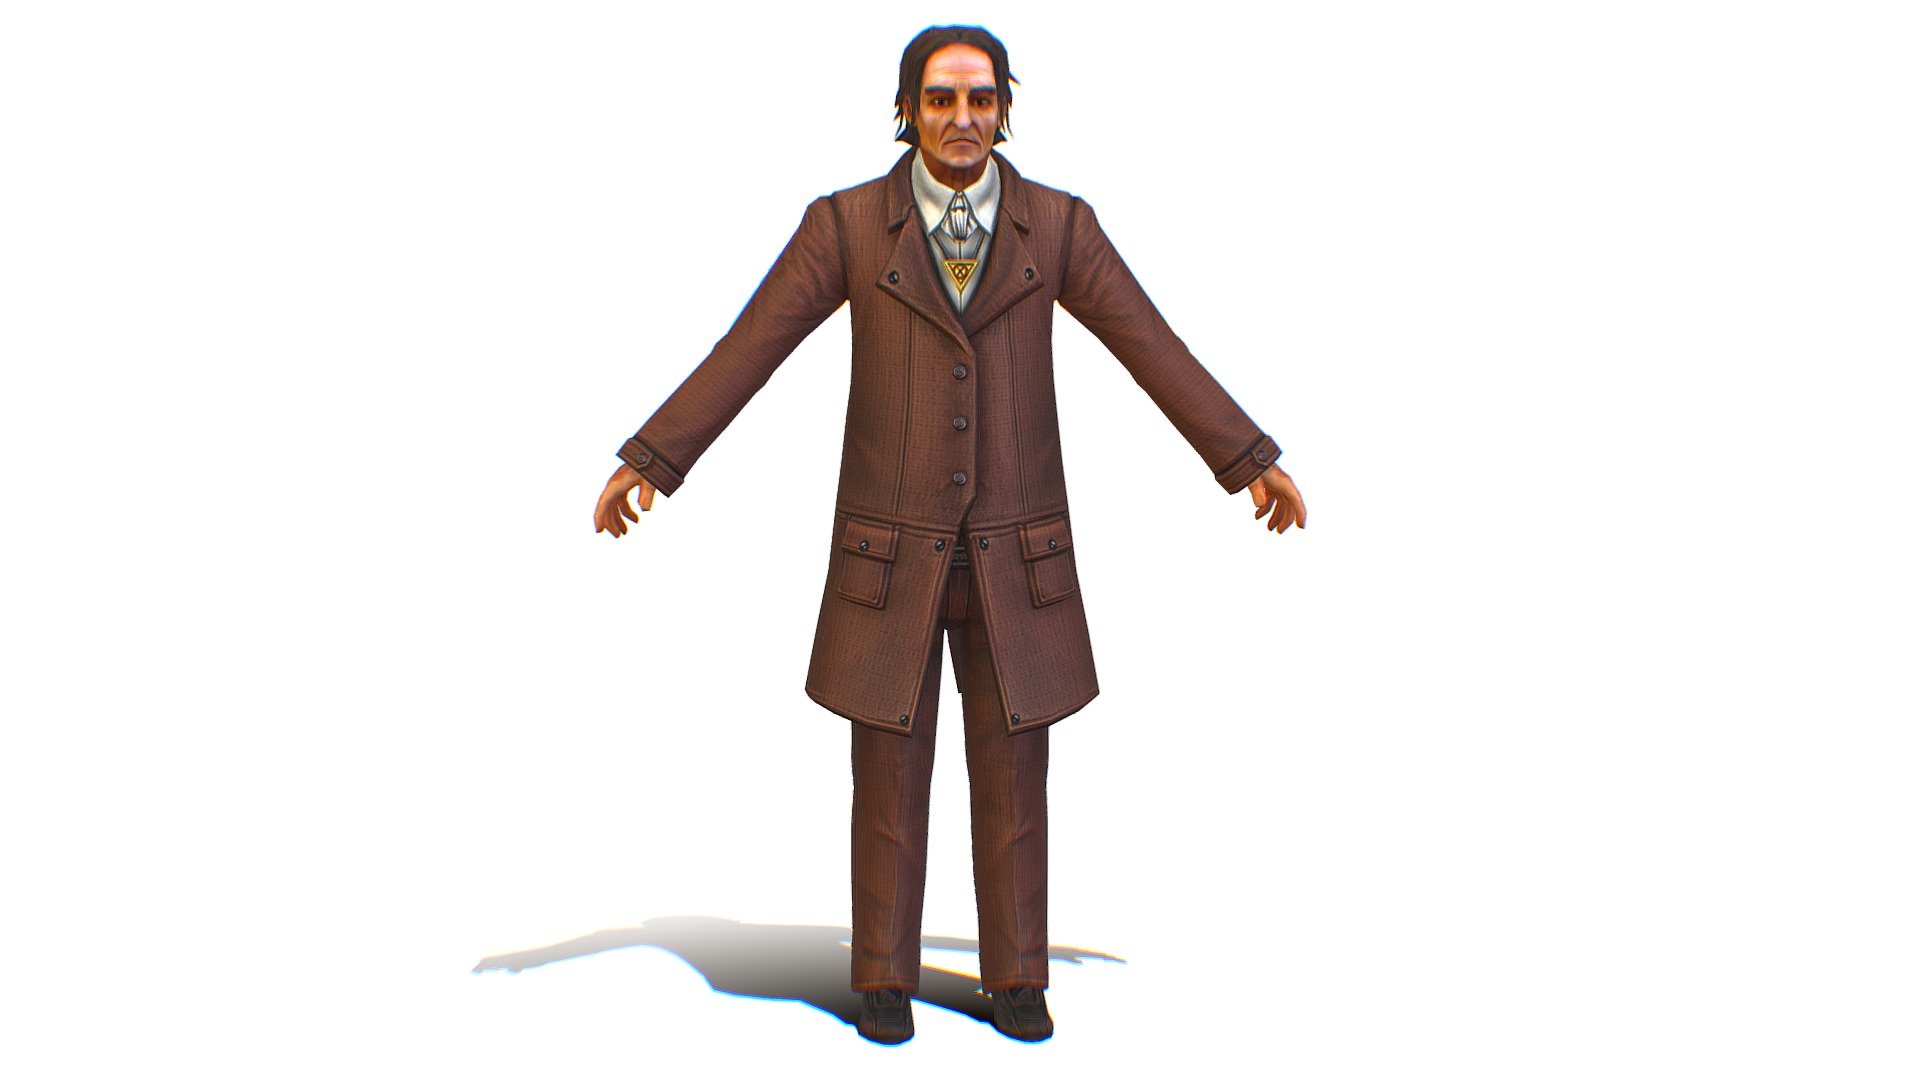 Old Man Concierge in Brown Suit - 3dsMax. Maya. OBJ. FBX file included/ textures 512 color only, head and body 3d model